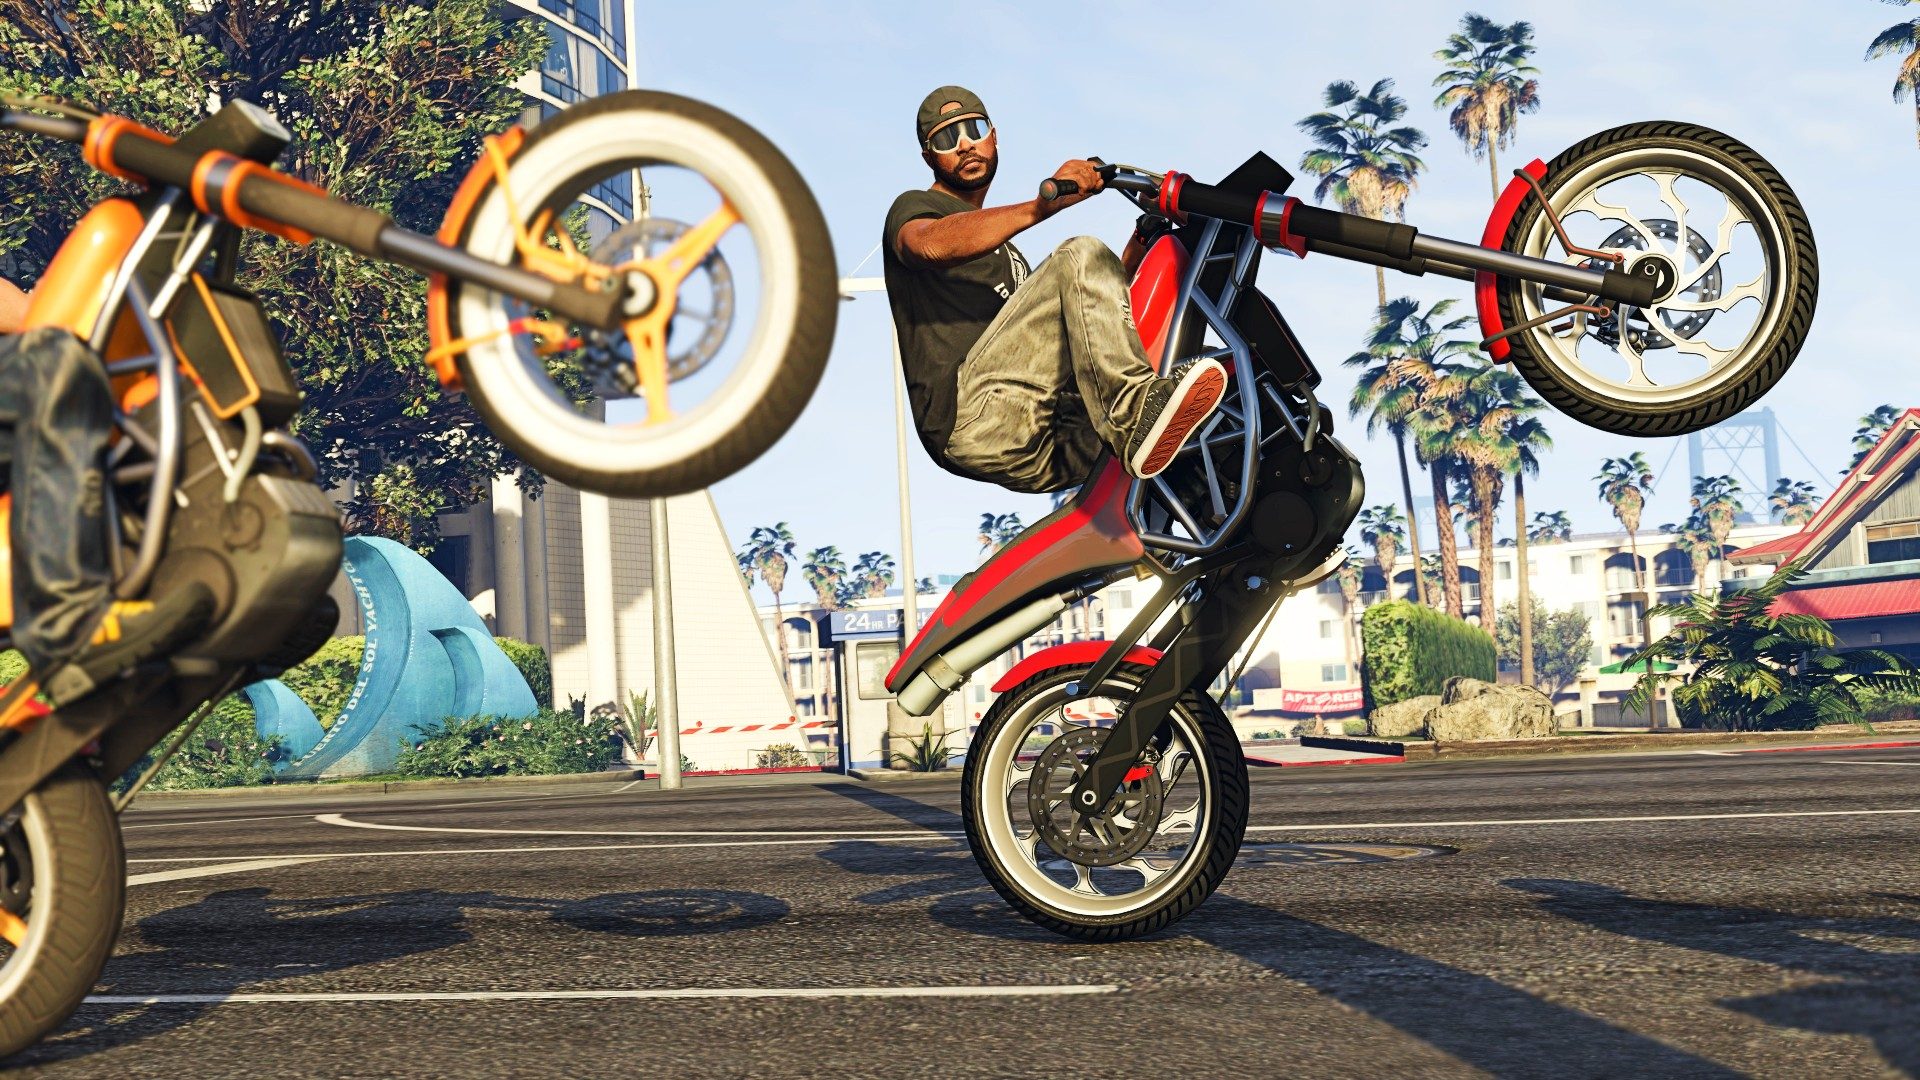 GTA Online’s weekly update brings extra rewards, a new prize ride, and free bicycles